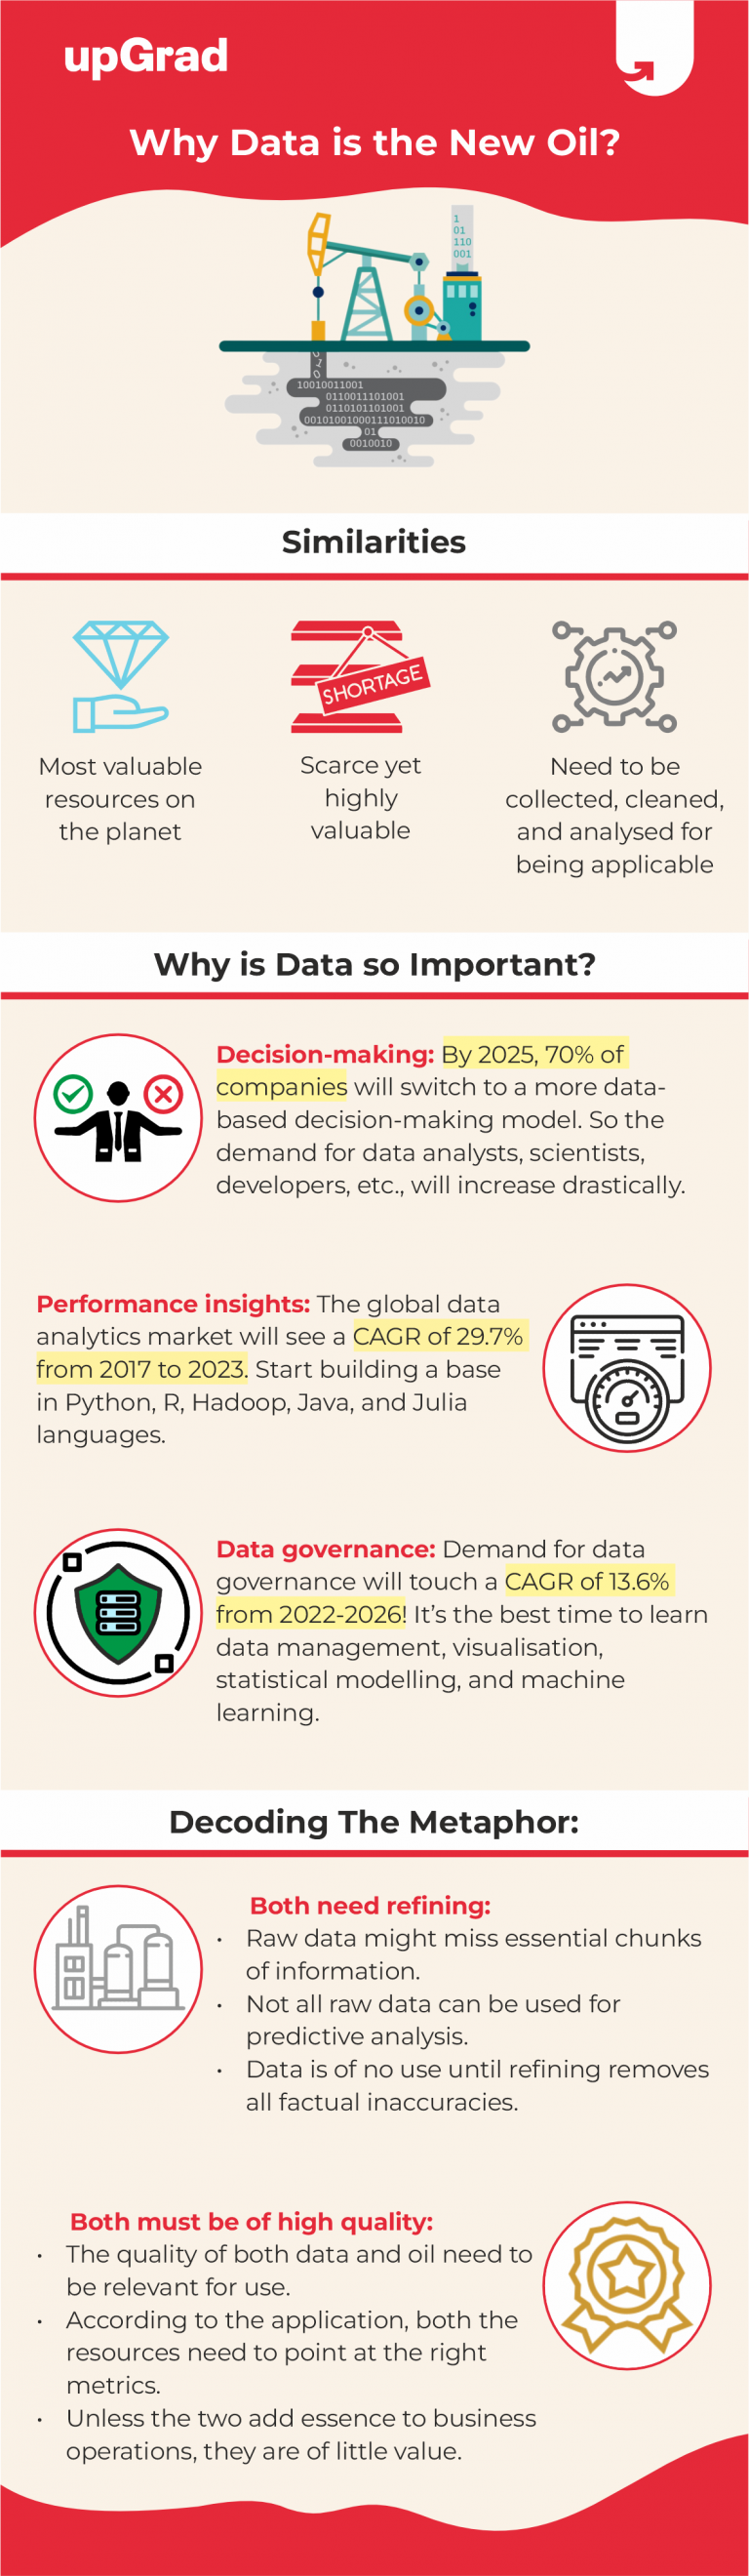 Why Data Is The New Oil 768x2640 